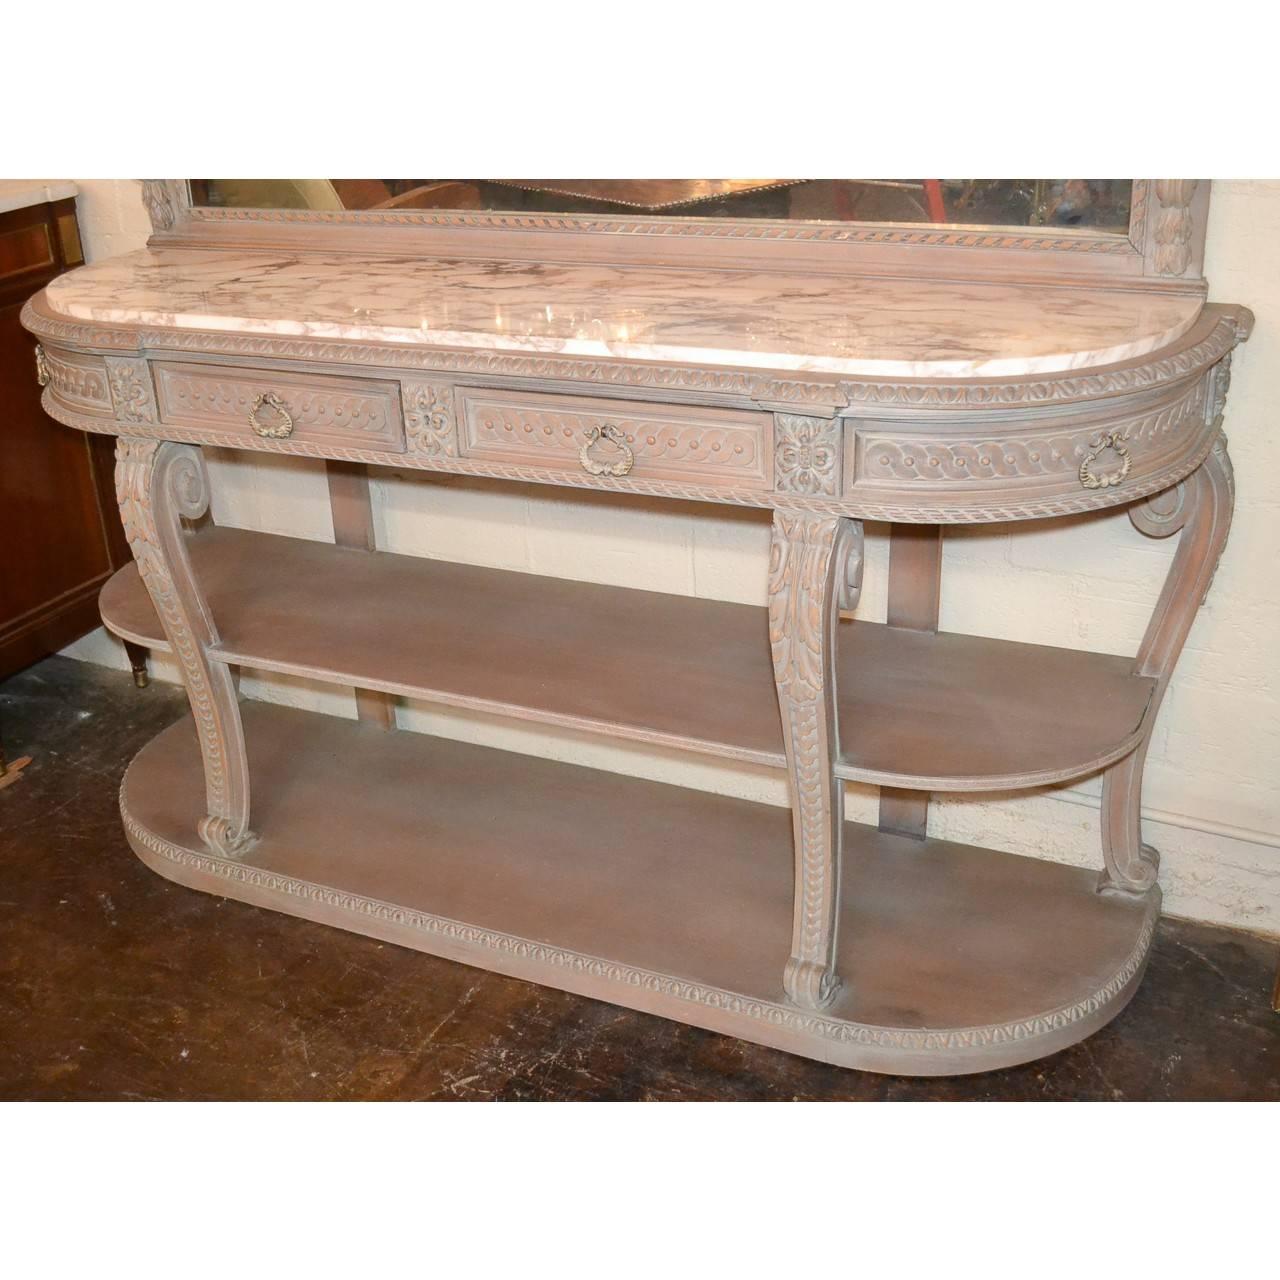 Superior quality French bleached and lacquered Jansen three tier server buffet with and exquisite marble-top. The mirrored upper portion finely carved with festoon and garland swags flanked by carved cornucopia. The four drawer frieze with rounded